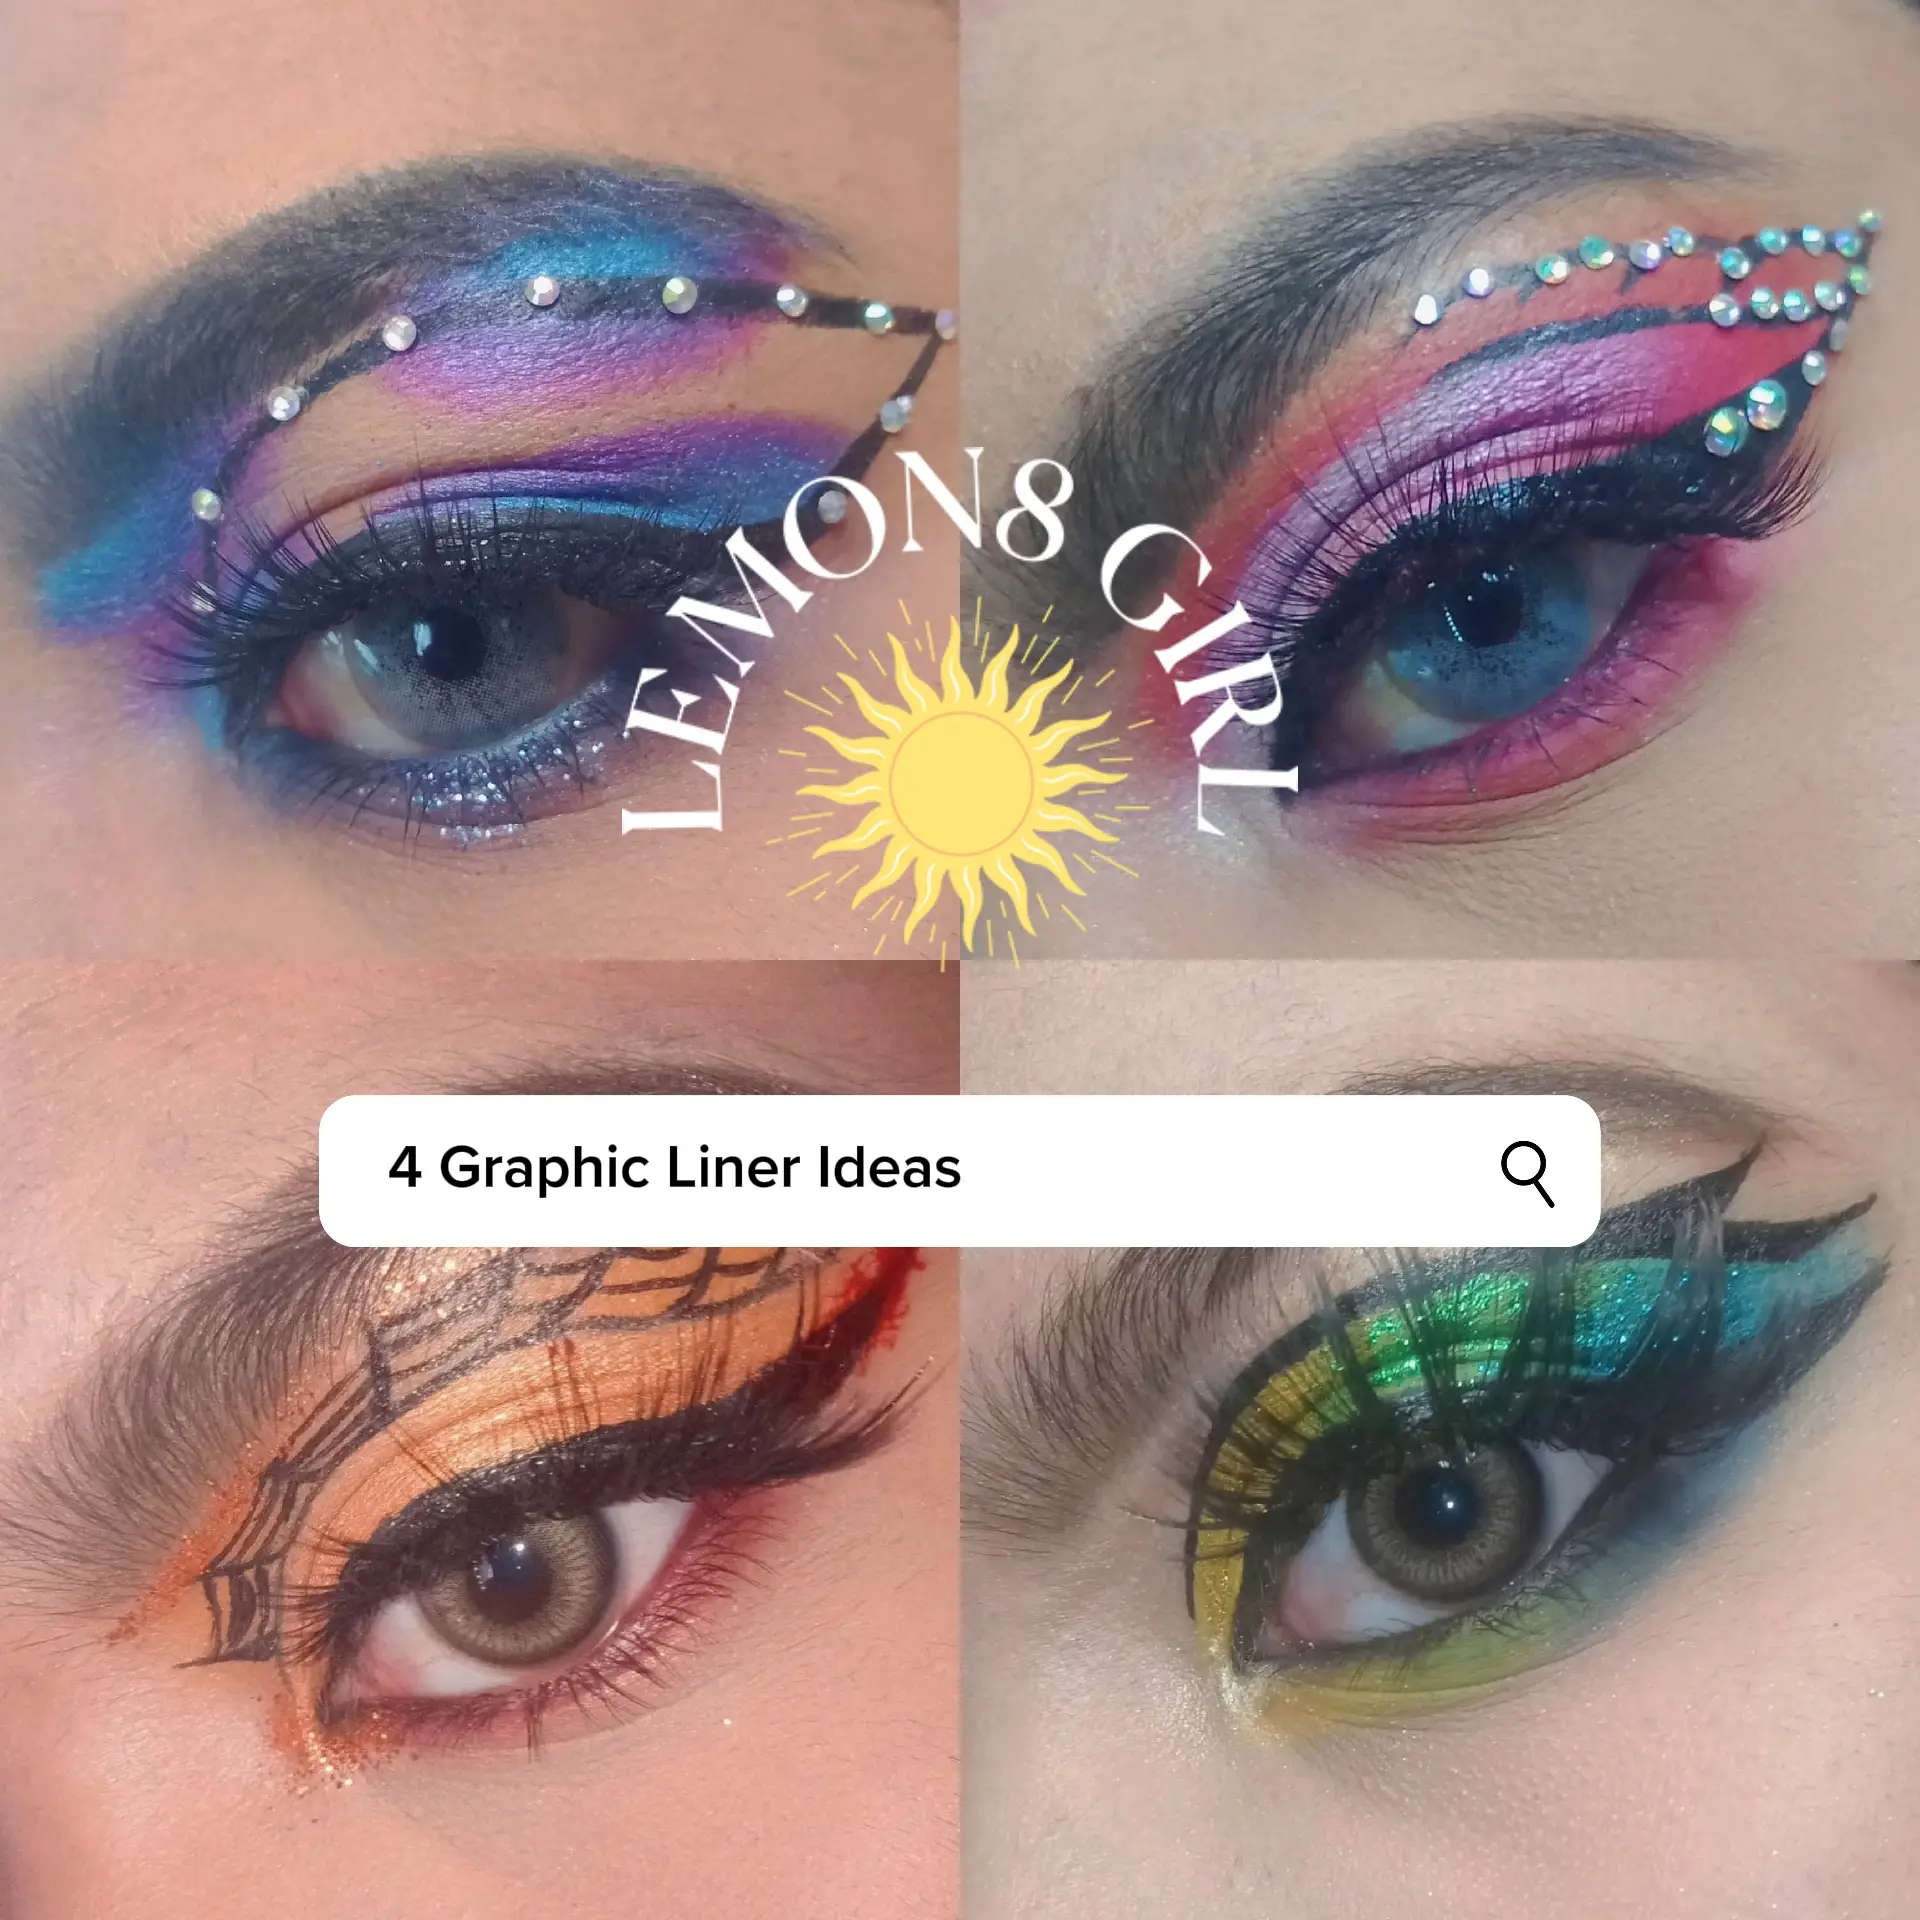 Graphic Liner with a Gold Touch  Eye makeup pictures, Creative eye makeup,  Eye makeup art